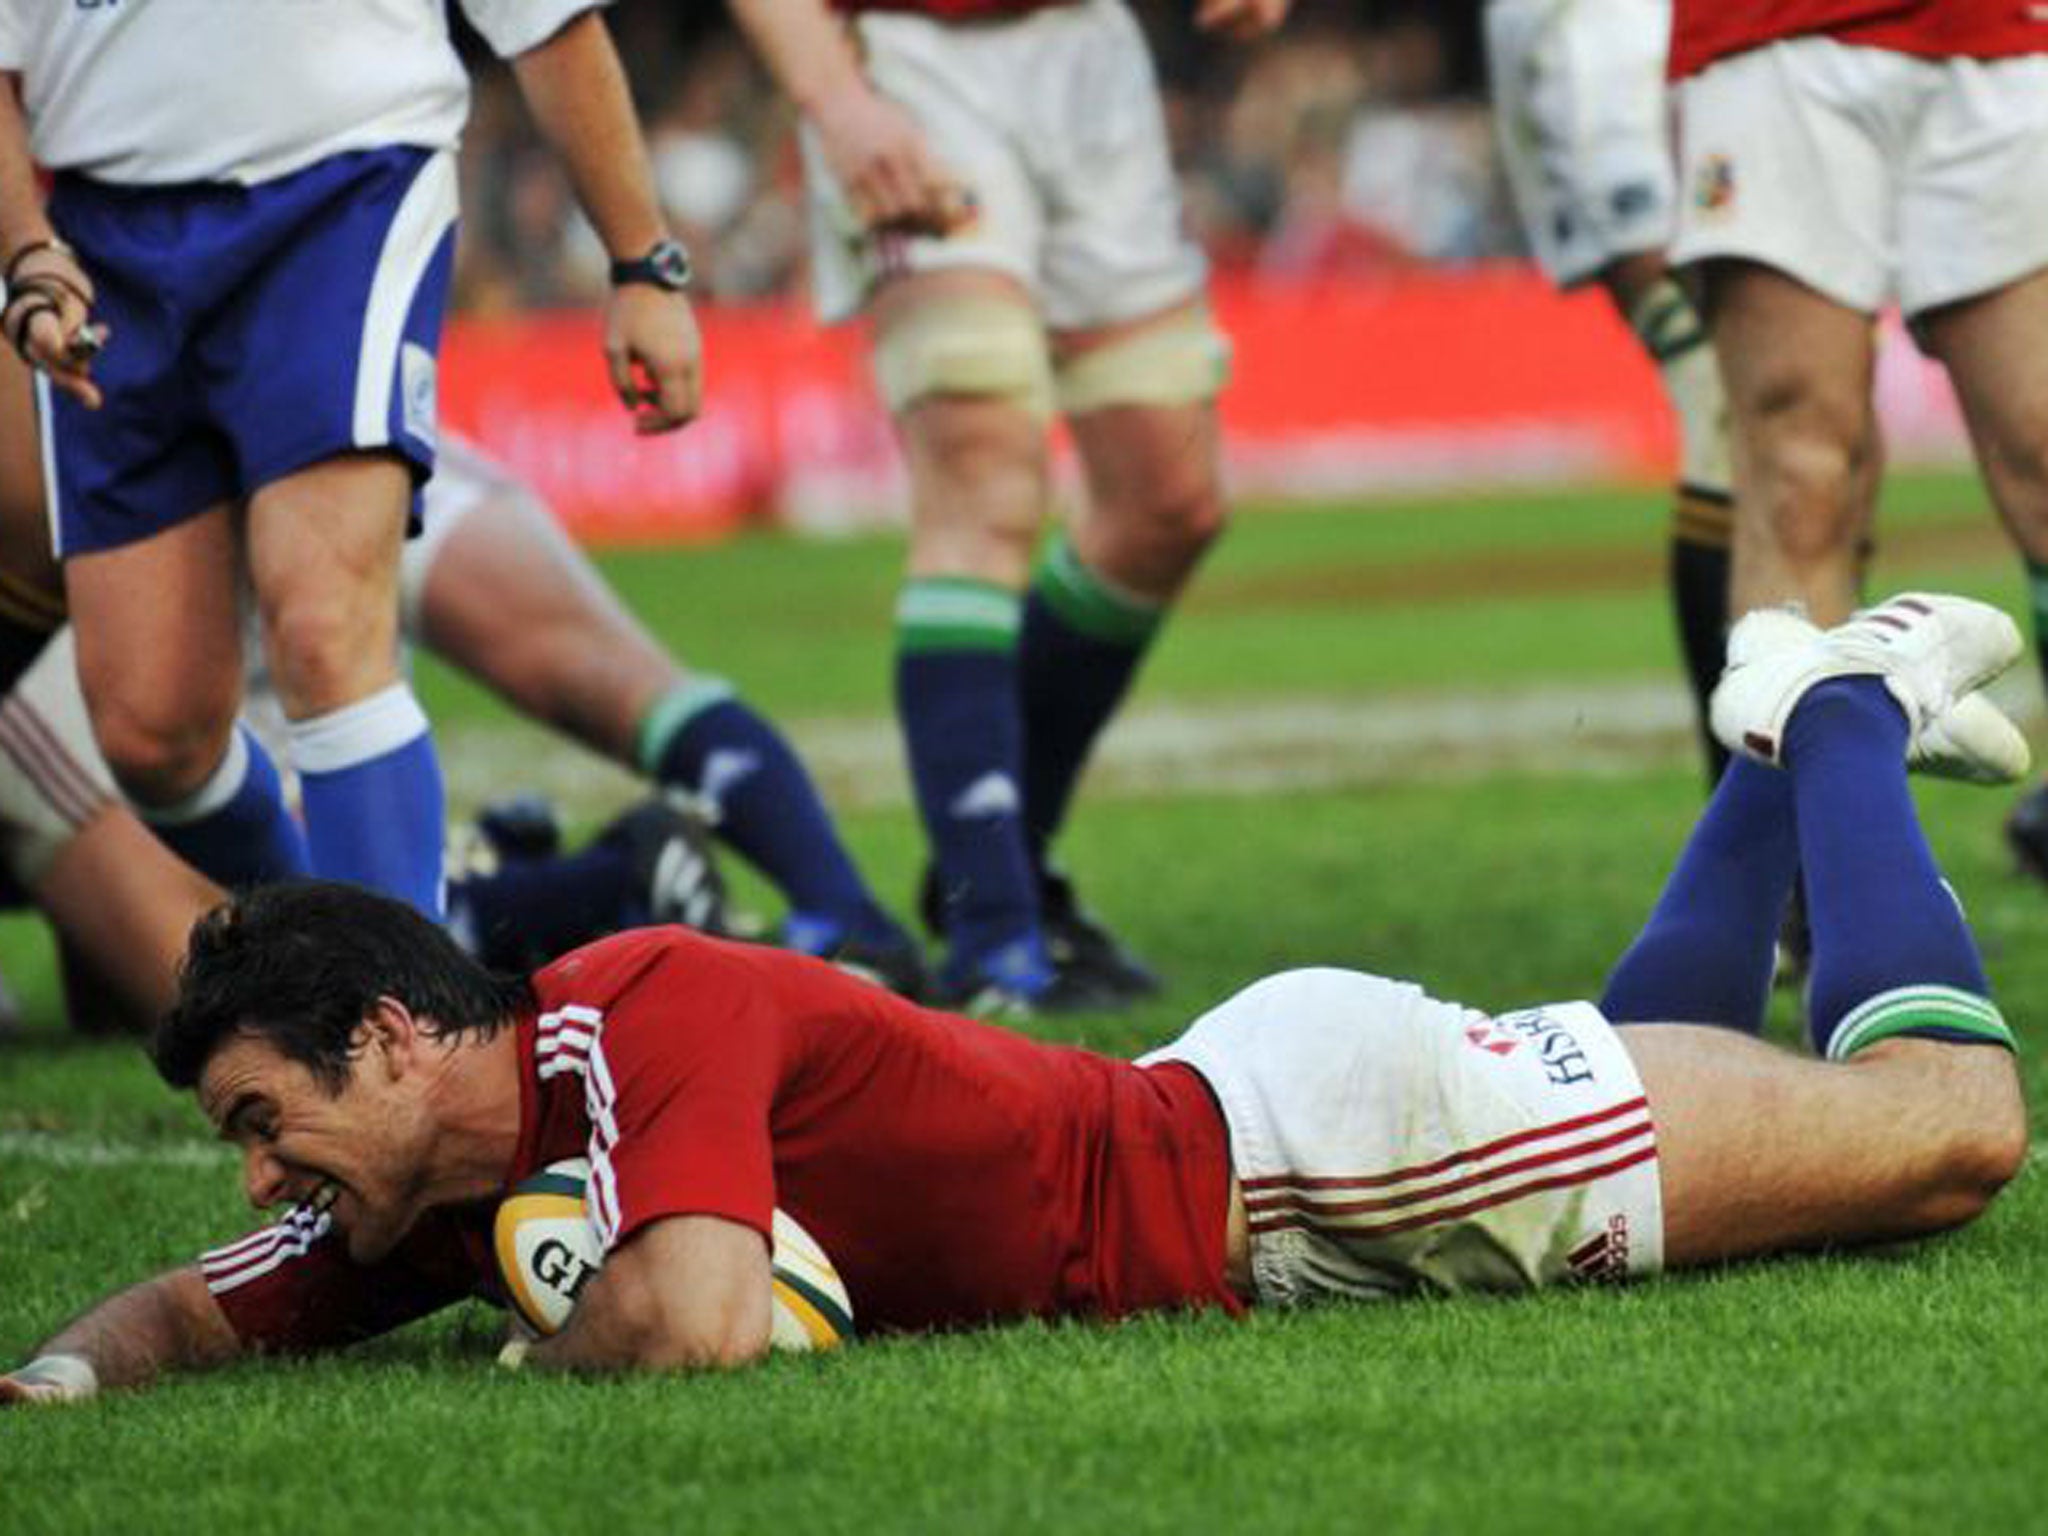 Mike Phillips scores a try for the Lions in the first Test against South Africa back on the 2009 tour